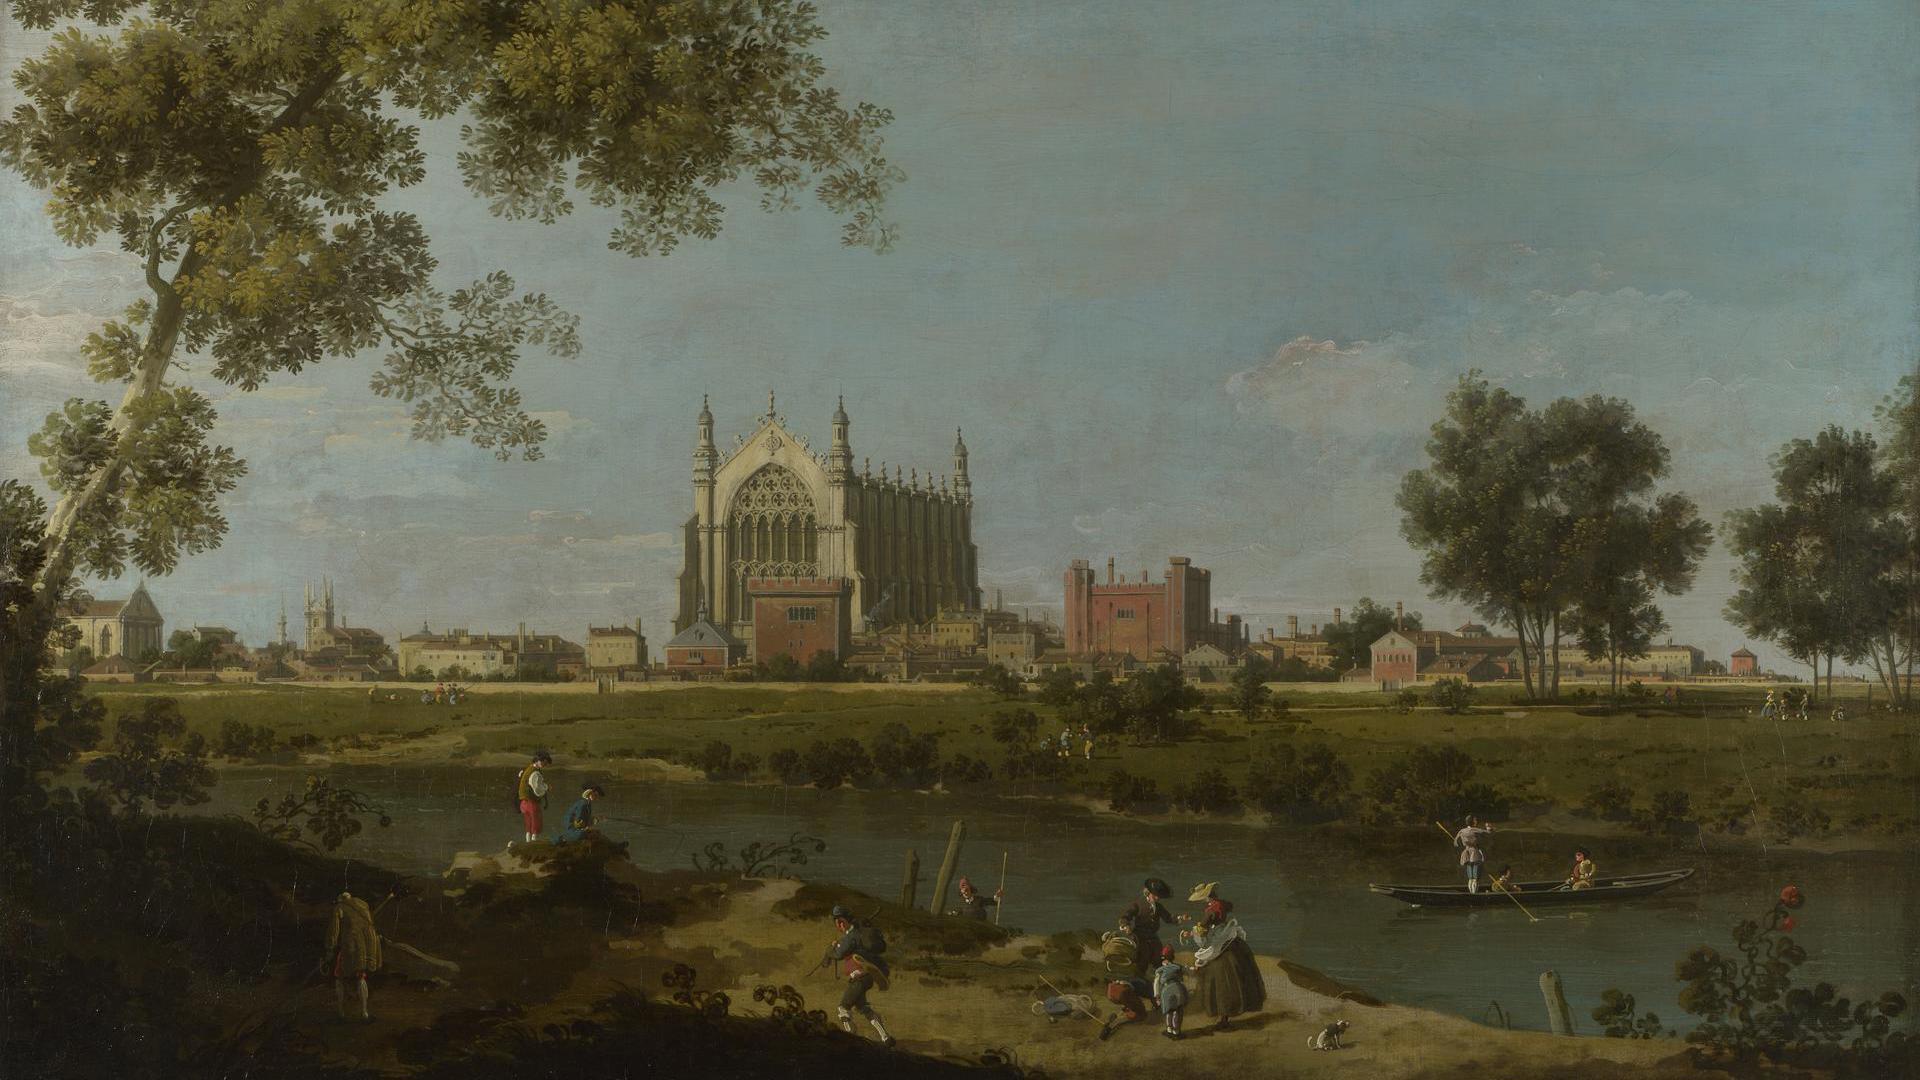 Eton College by Canaletto